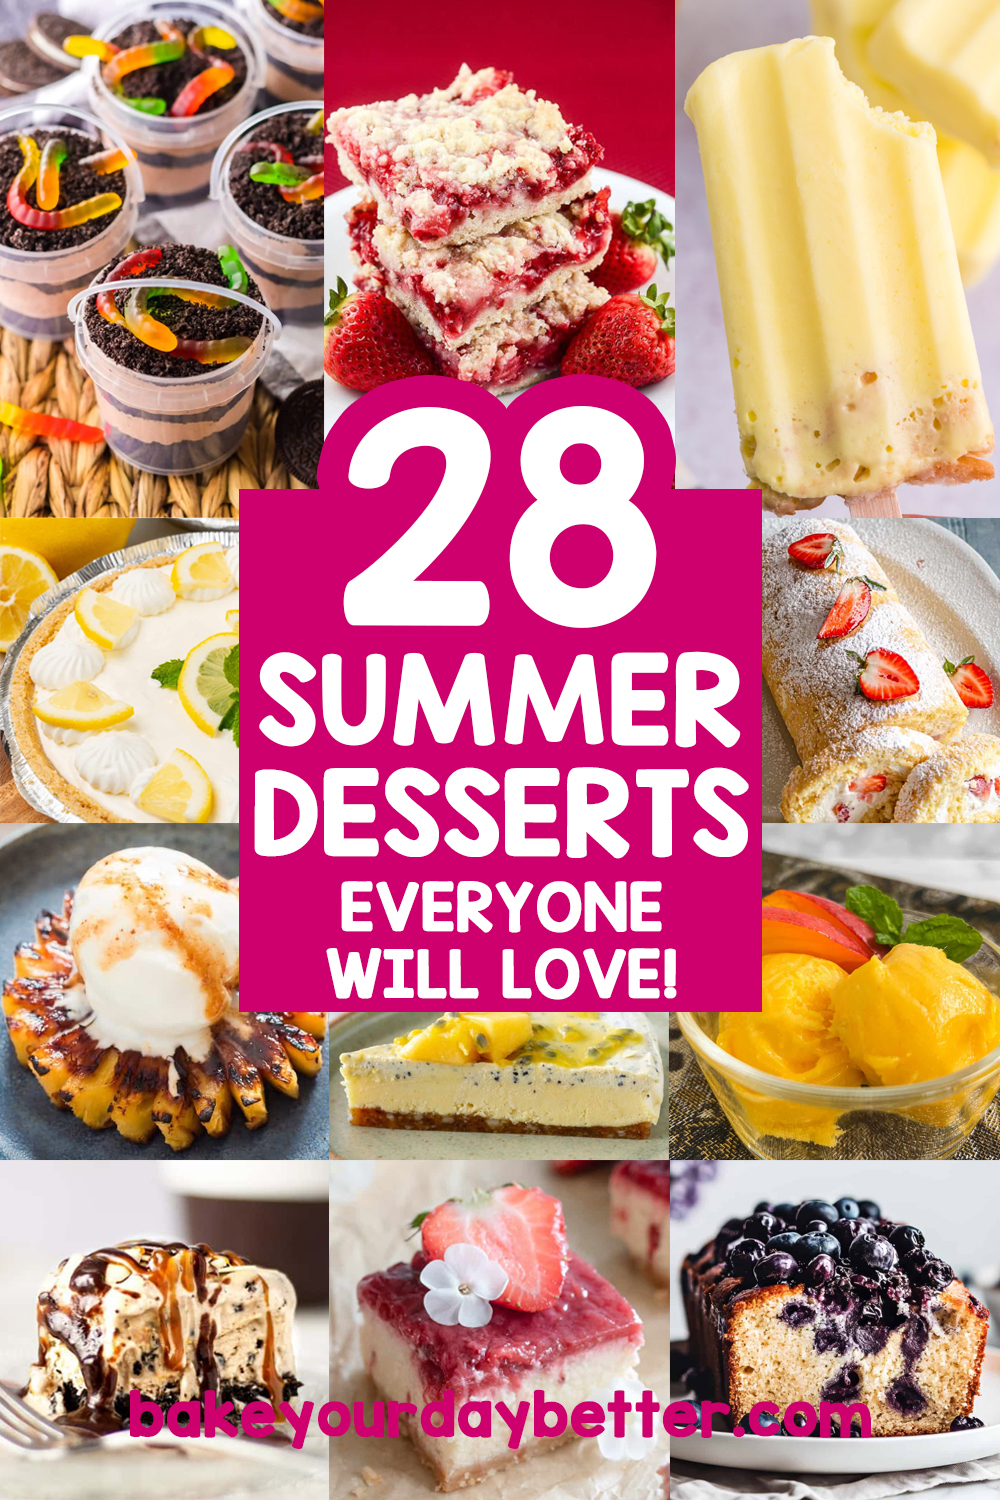 pictures of summer desserts with text overlay that says: 28 summer desserts everyone will love